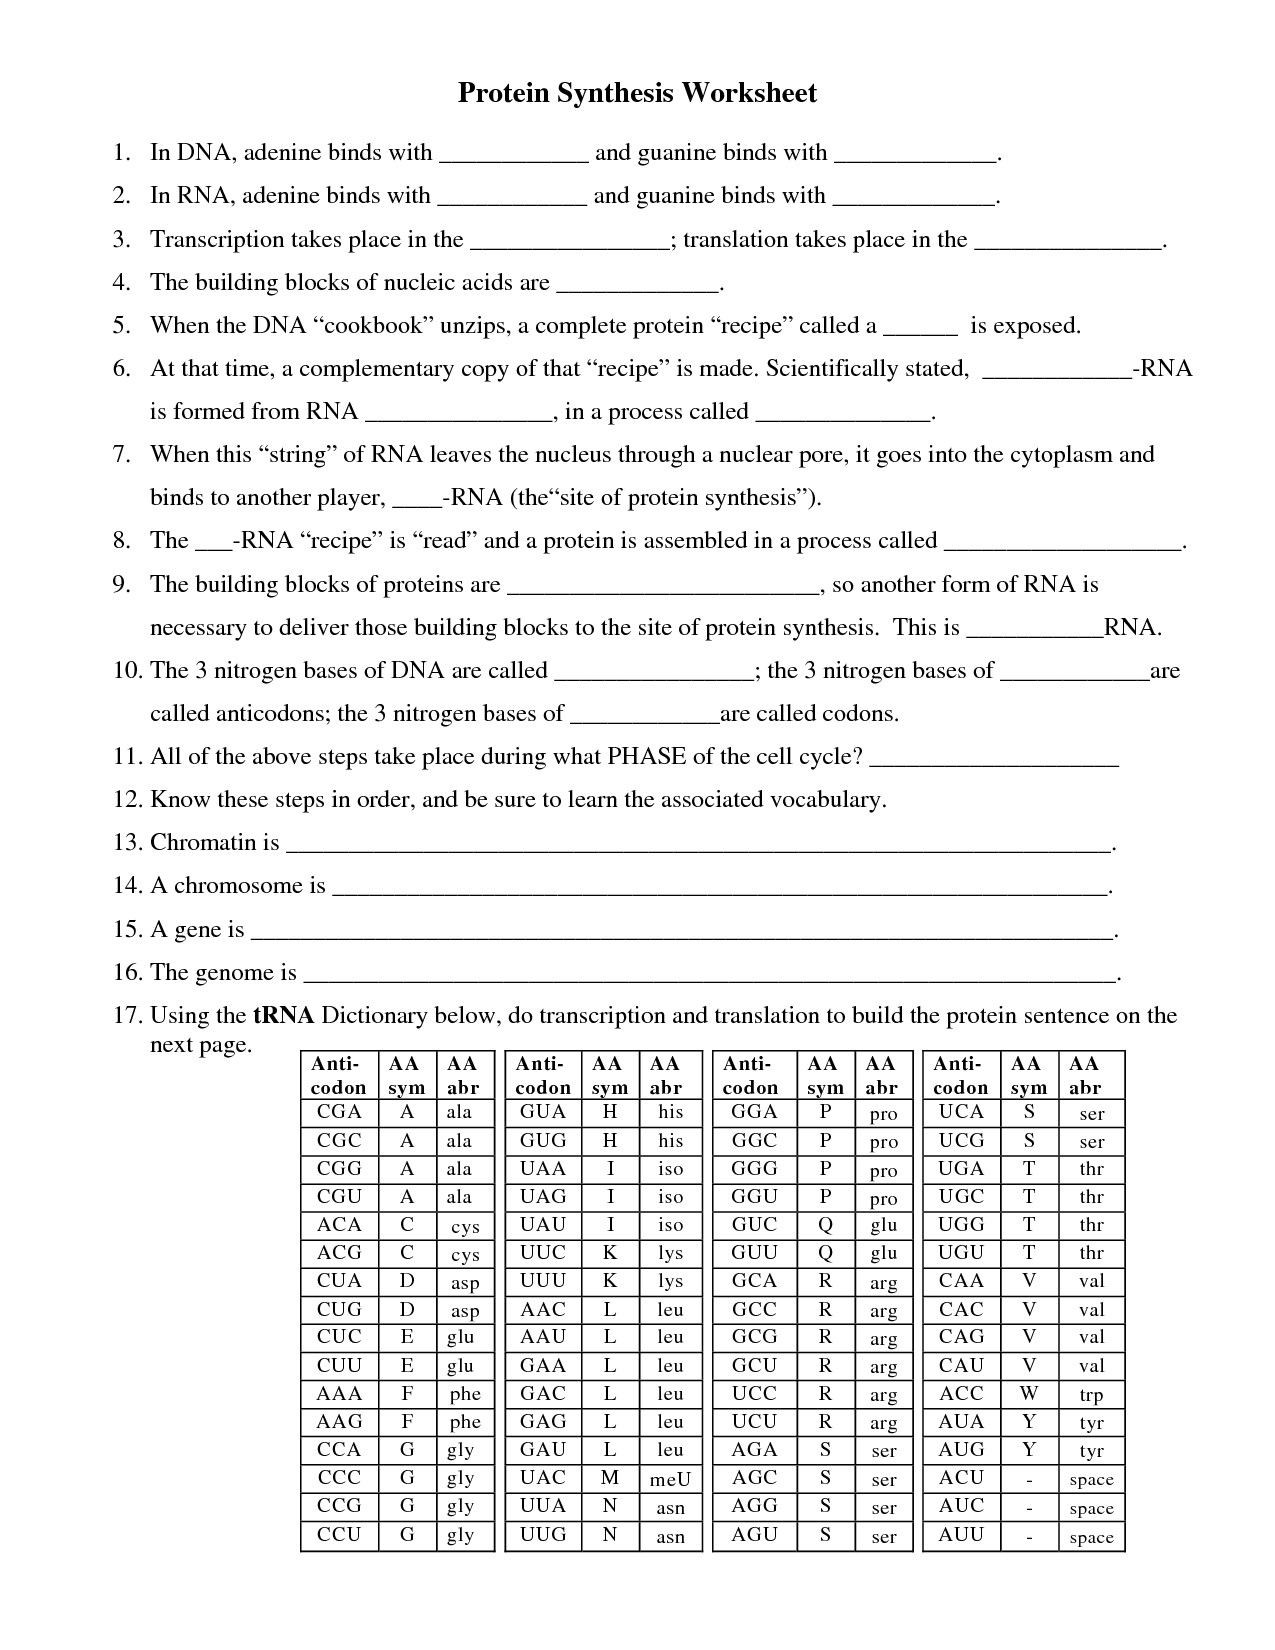 Transcription and Translation Worksheet Prime Dna and Protein Synthesis Worksheet Answers